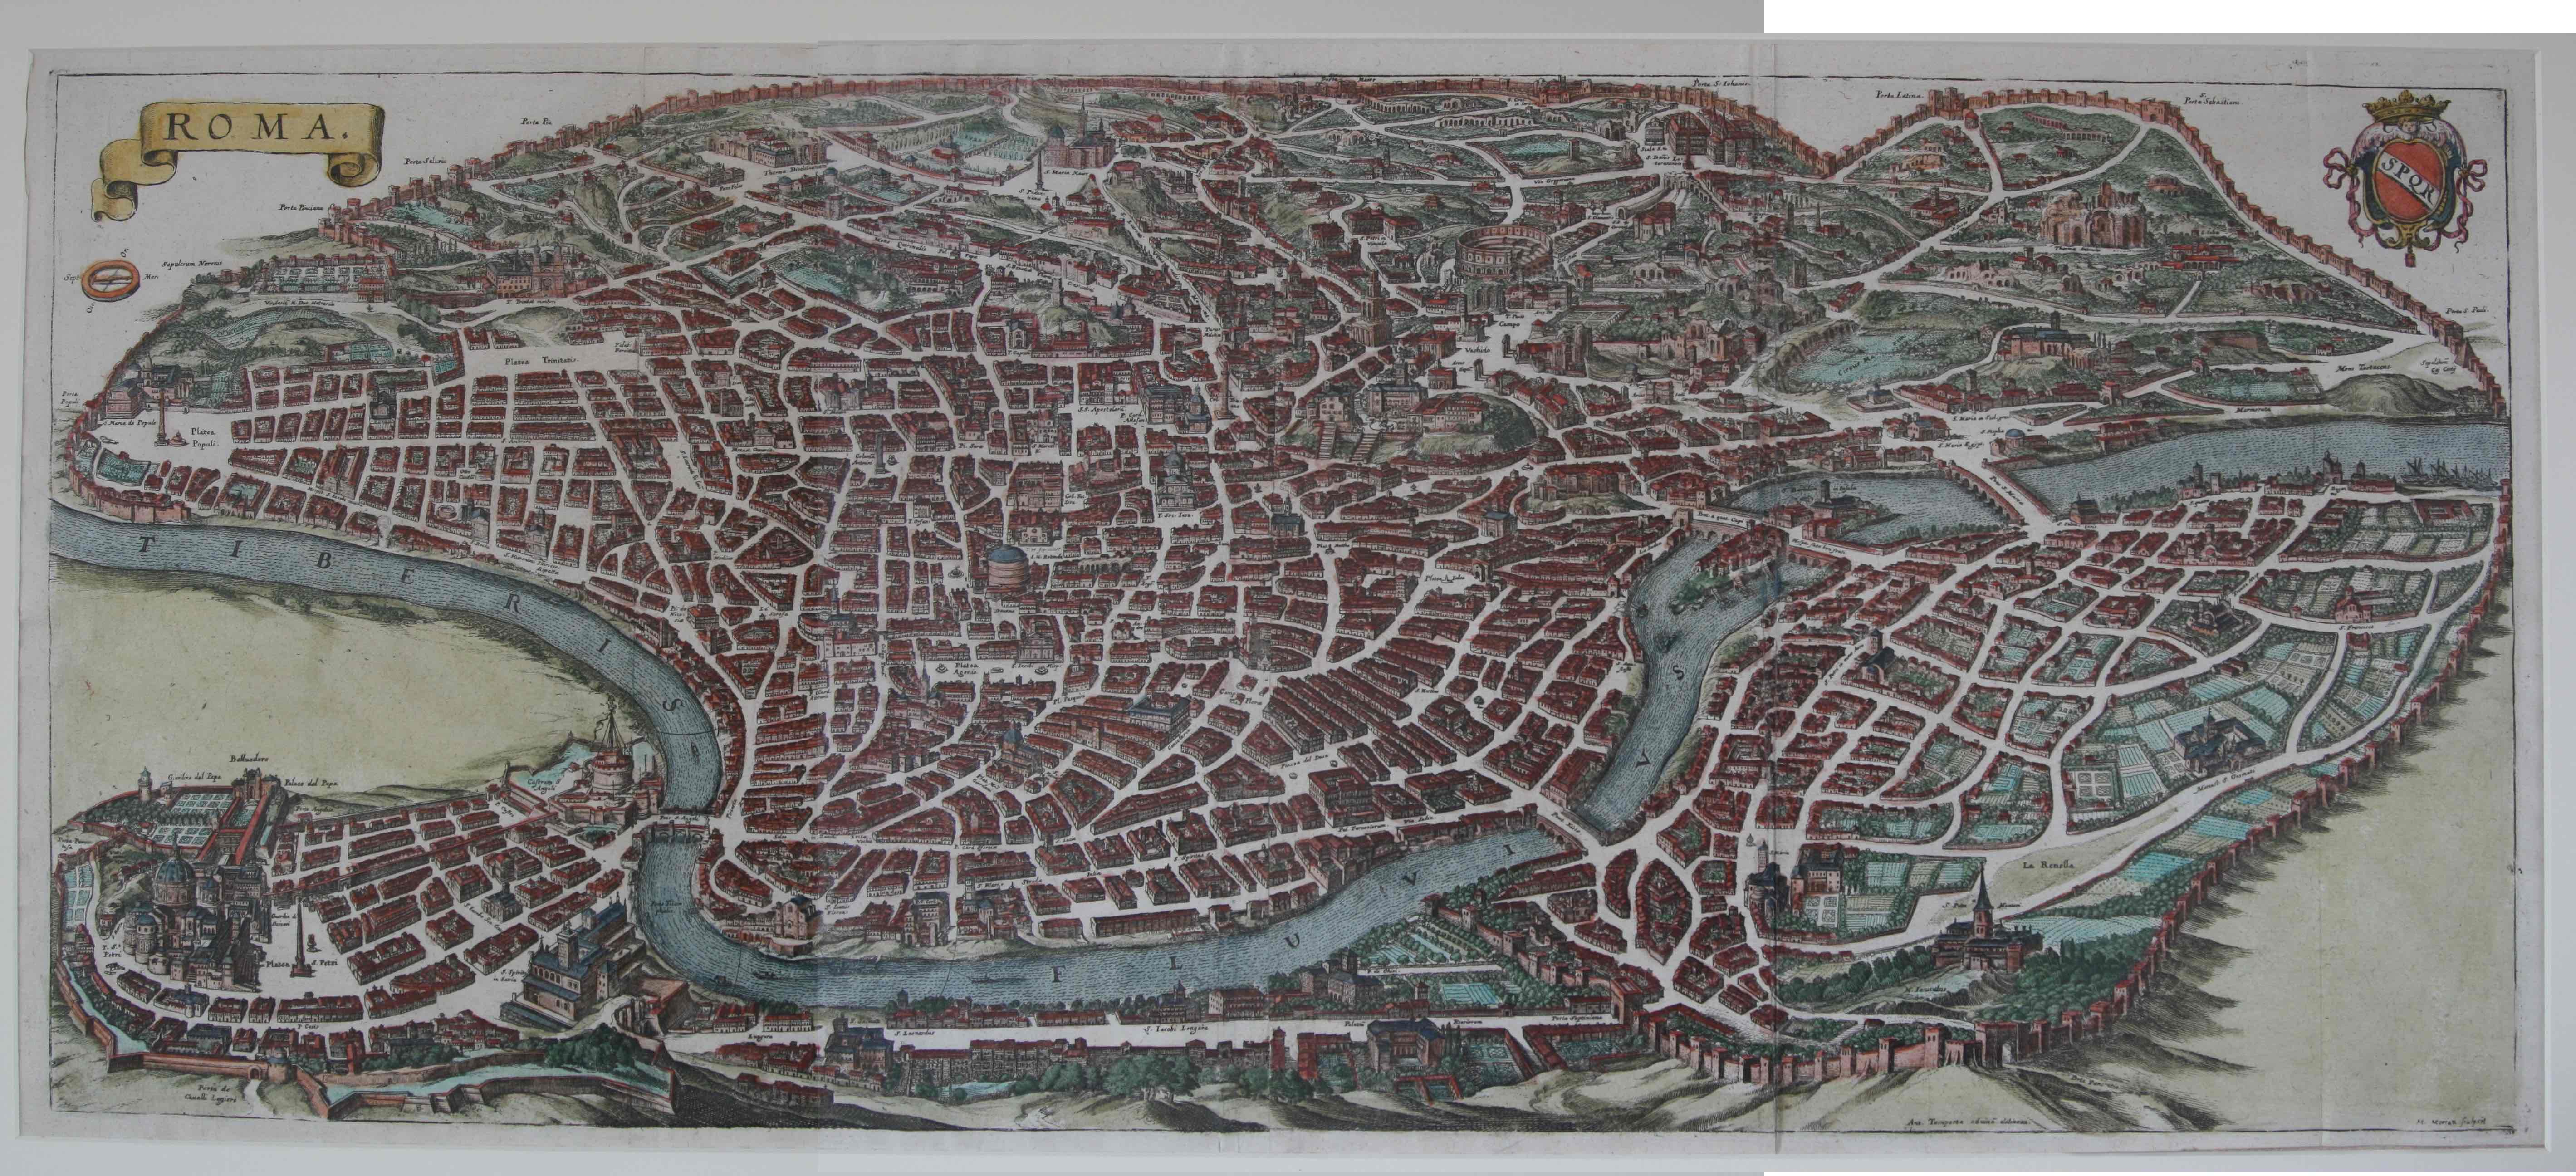 Map of Rome from 20 years earlier (1688)